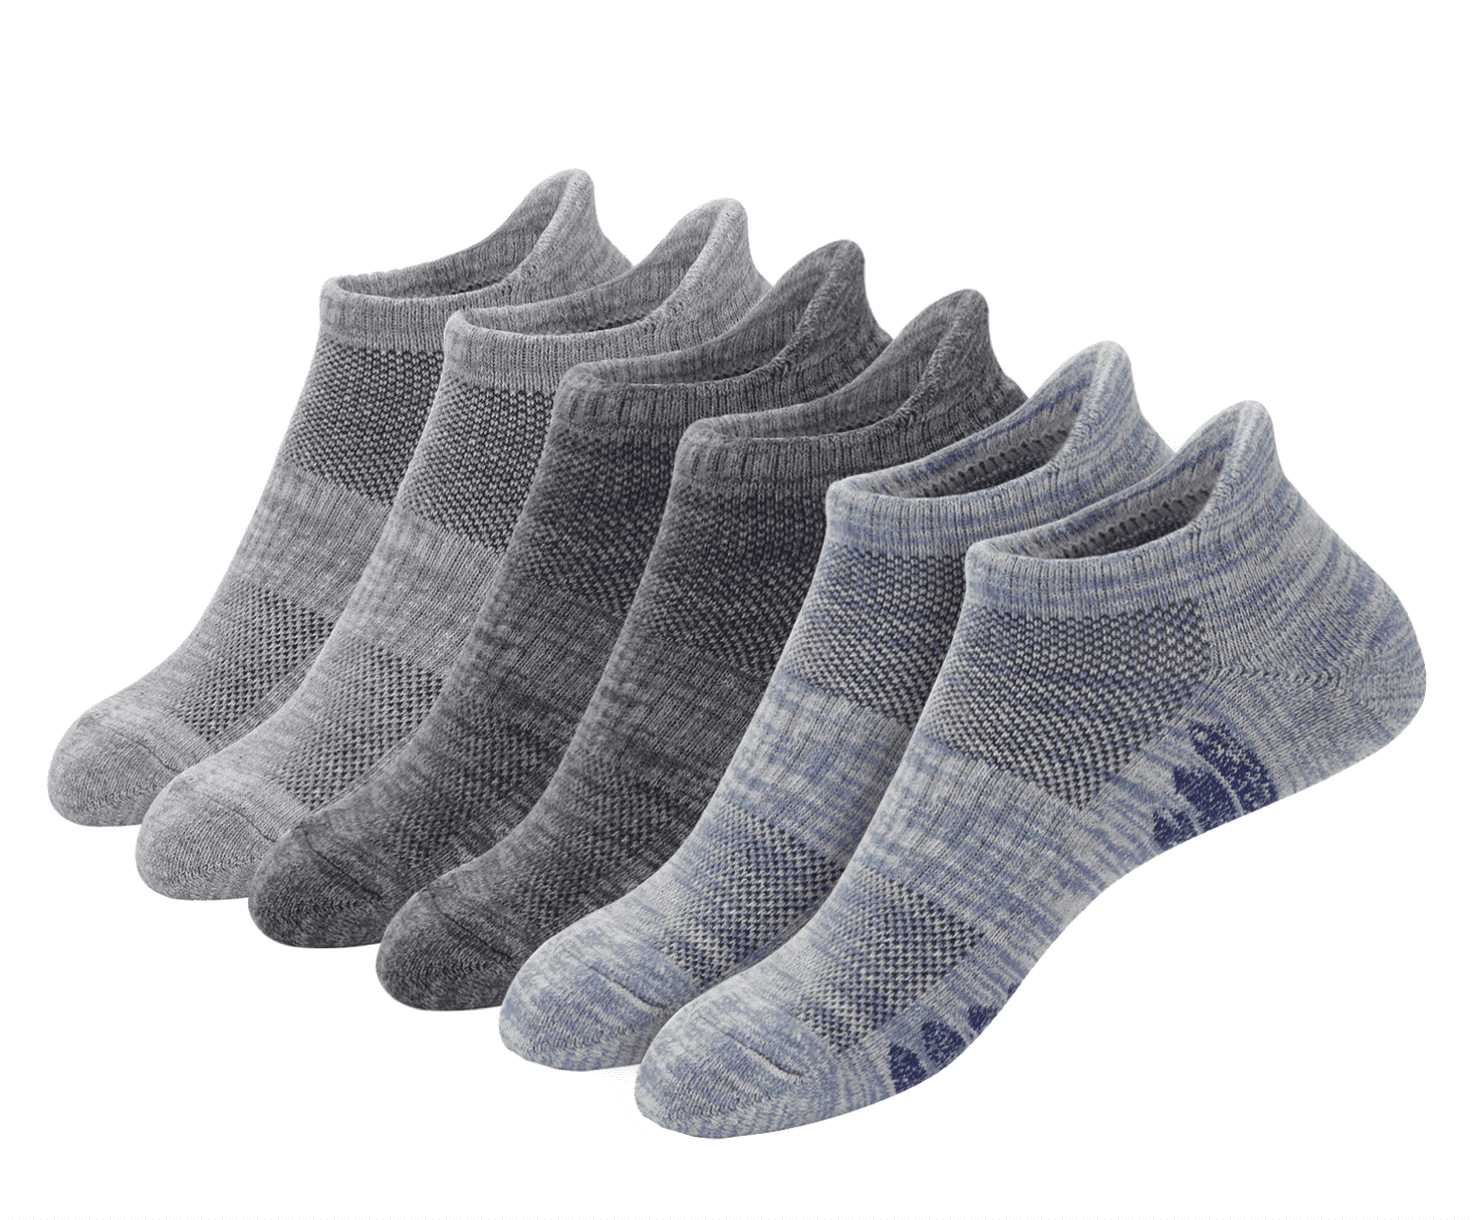 KOZR Running Ankle Socks 6 Pack for Men and Women with Cushion Low Cut Athletic Sport Tab Socks